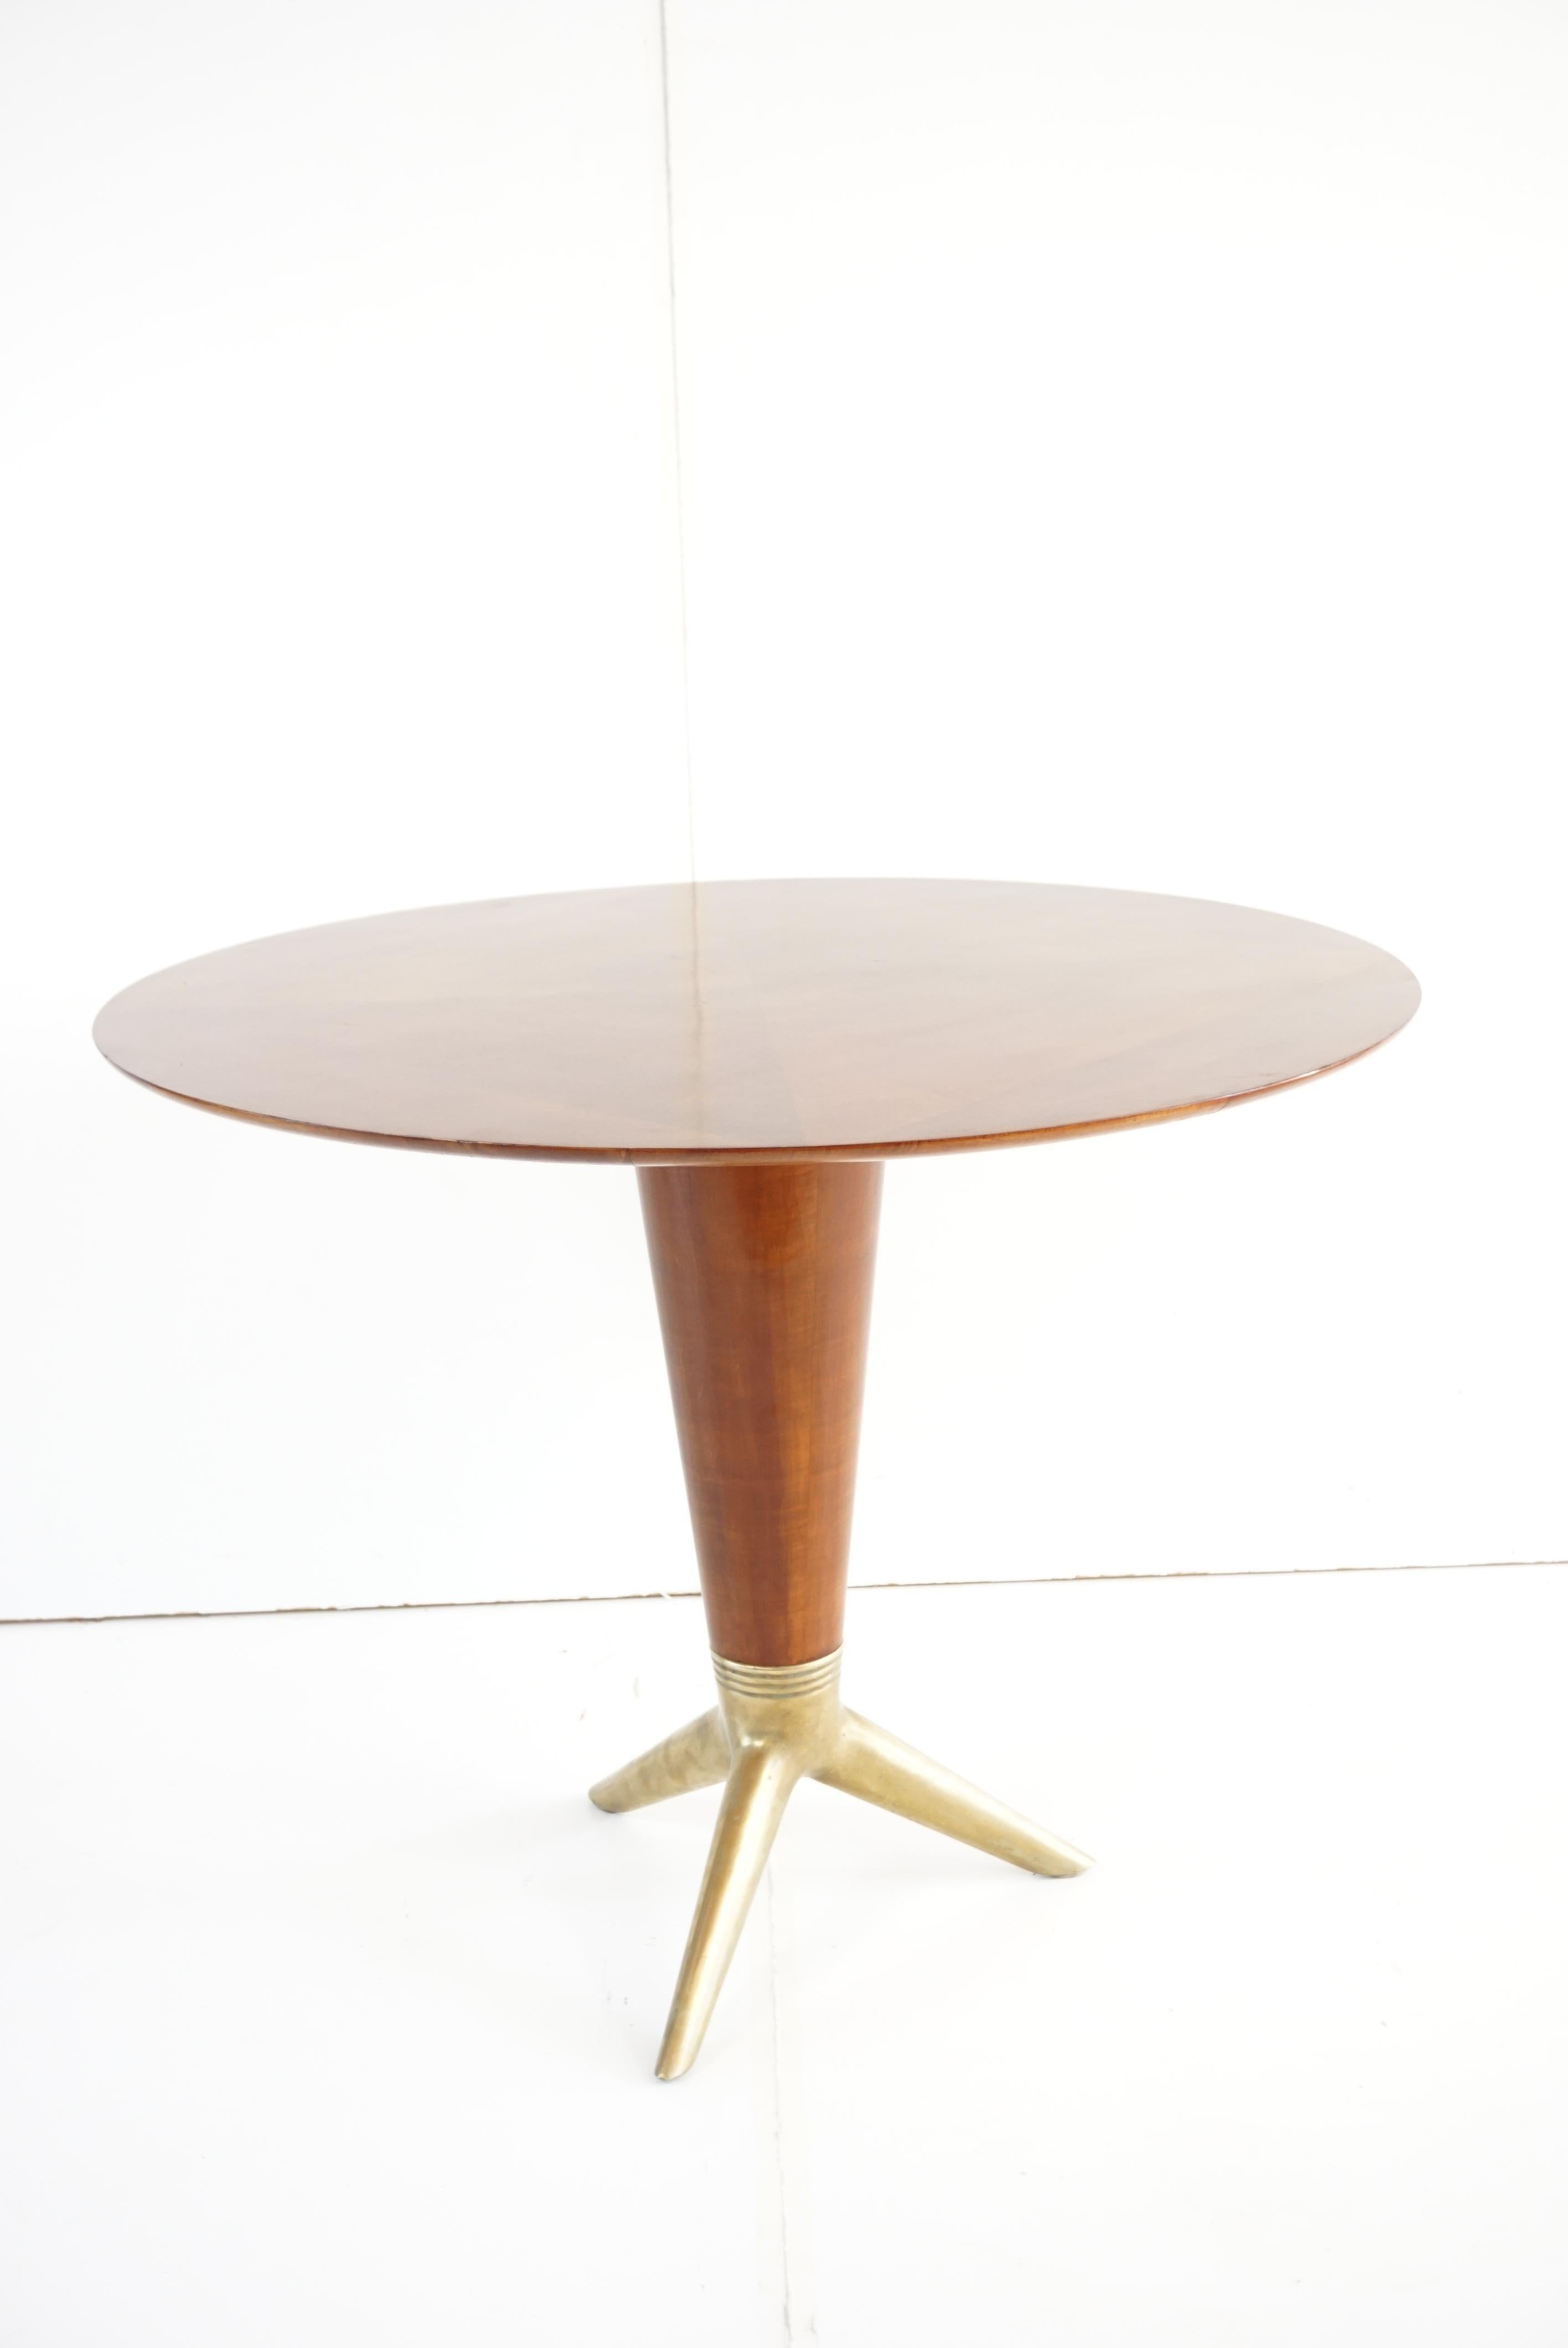 Stunning maple and brass center table.
previously thought to be designed by Gio Ponti the table is manufactured by I.S.A Bergamo . ISA produced many famous pieces designed by some of the best architect and designers of the period such as Gottardi,